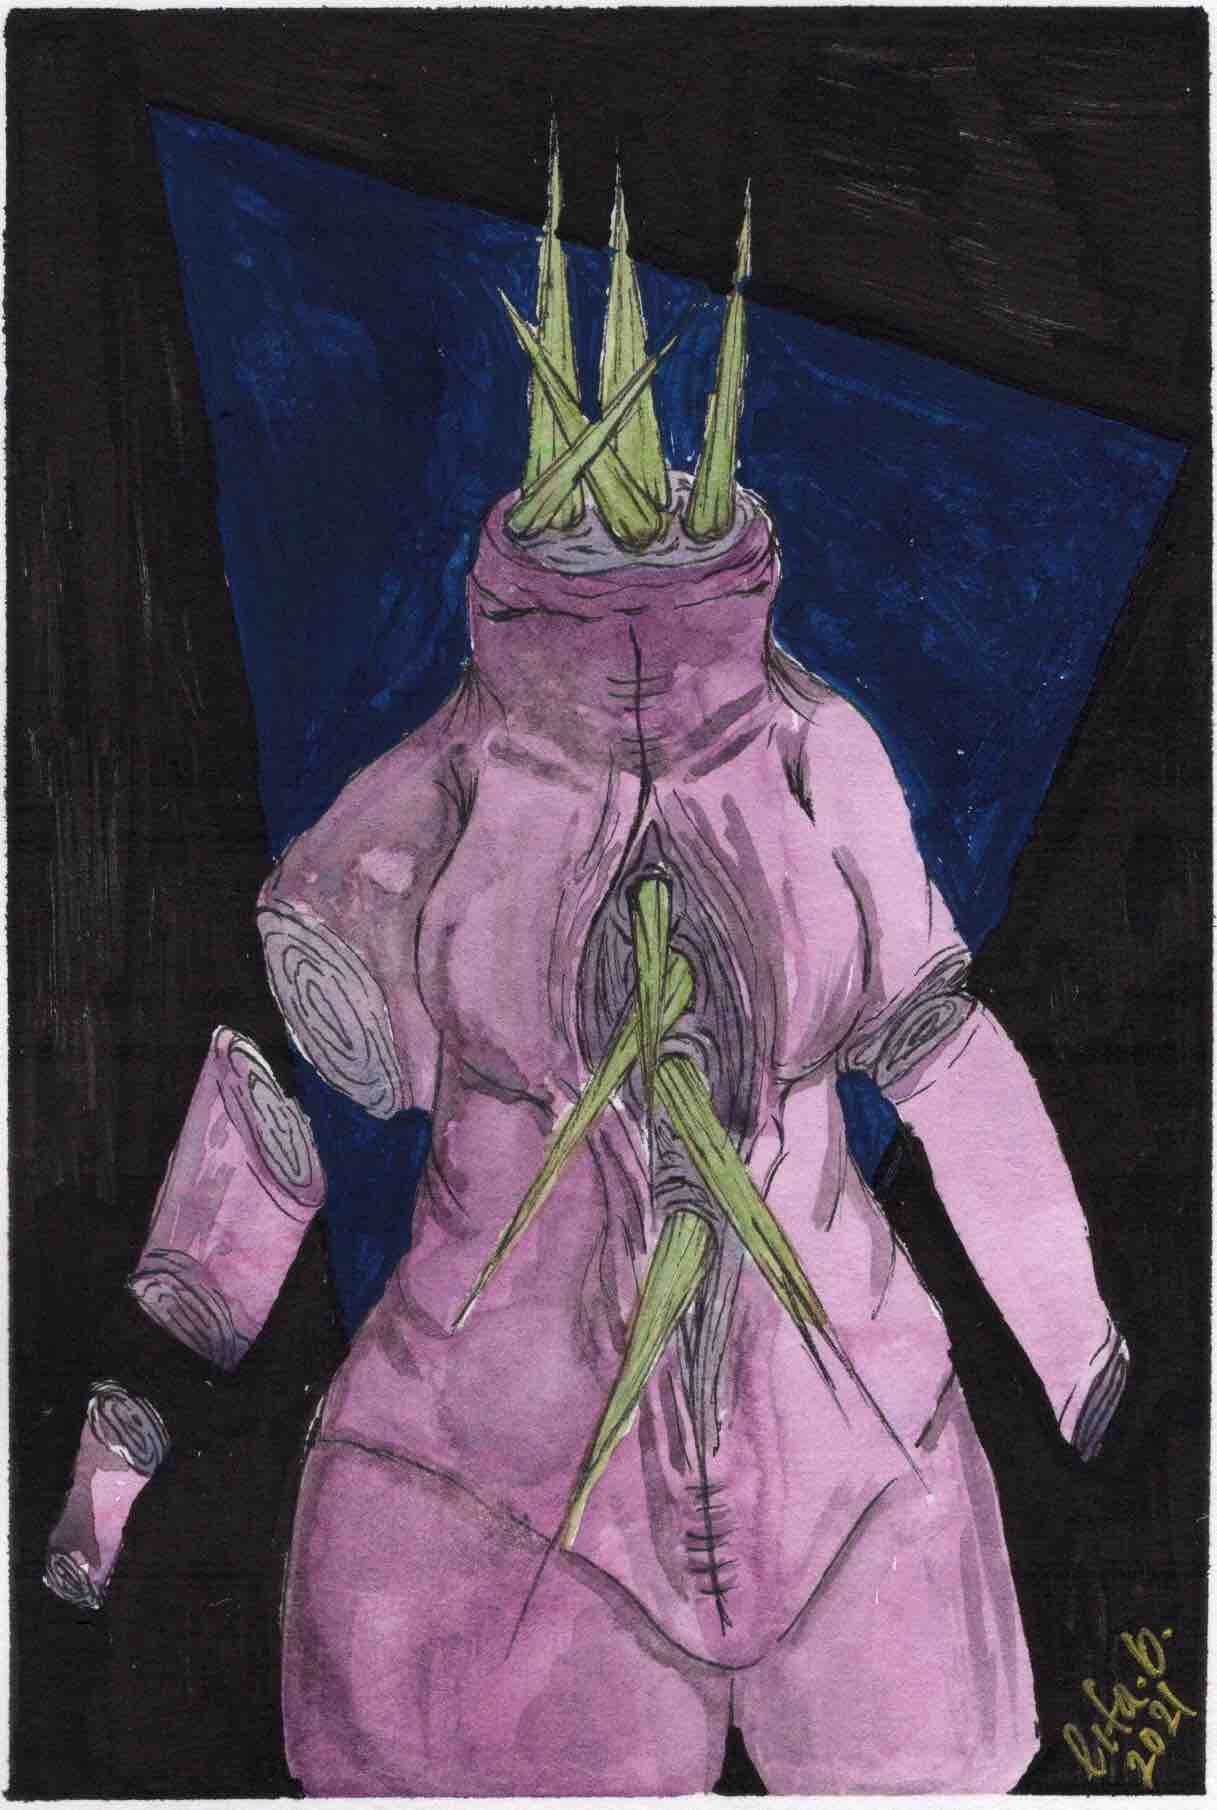 This is a pen drawing colourized with watercolour, coloured pencil, and guache. Against the stark background of a dark blue triangle on a field of black lies a headless sickly pink torso. The arms are severed into separate parts like cuts of meat, and the hands are gone. From a throat-to-crotch incision, sickly green spikes emerge, and also from the neck stump.